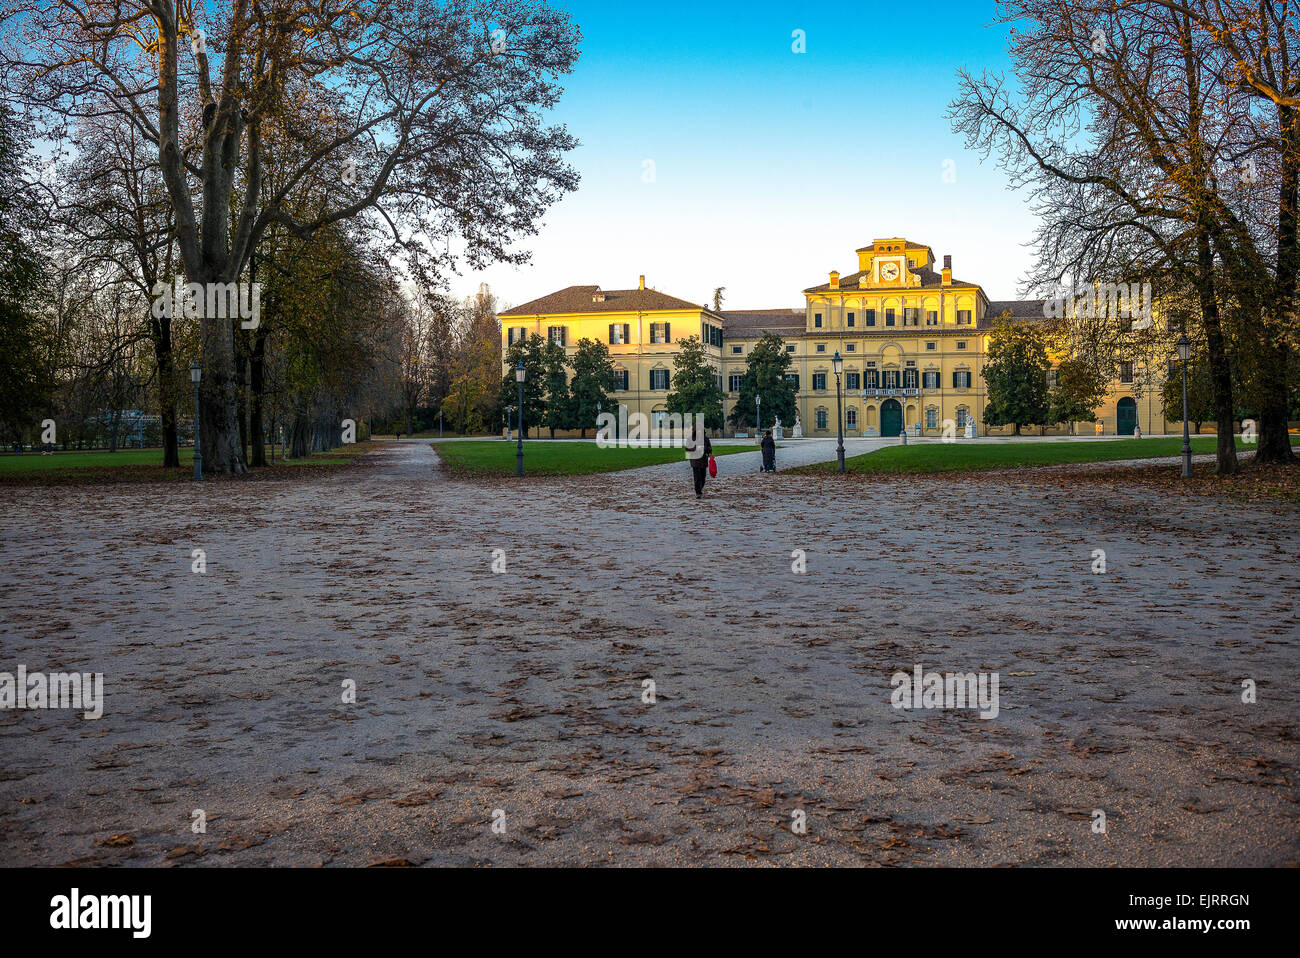 Parma, view of the Ducale palace at the sunset Stock Photo